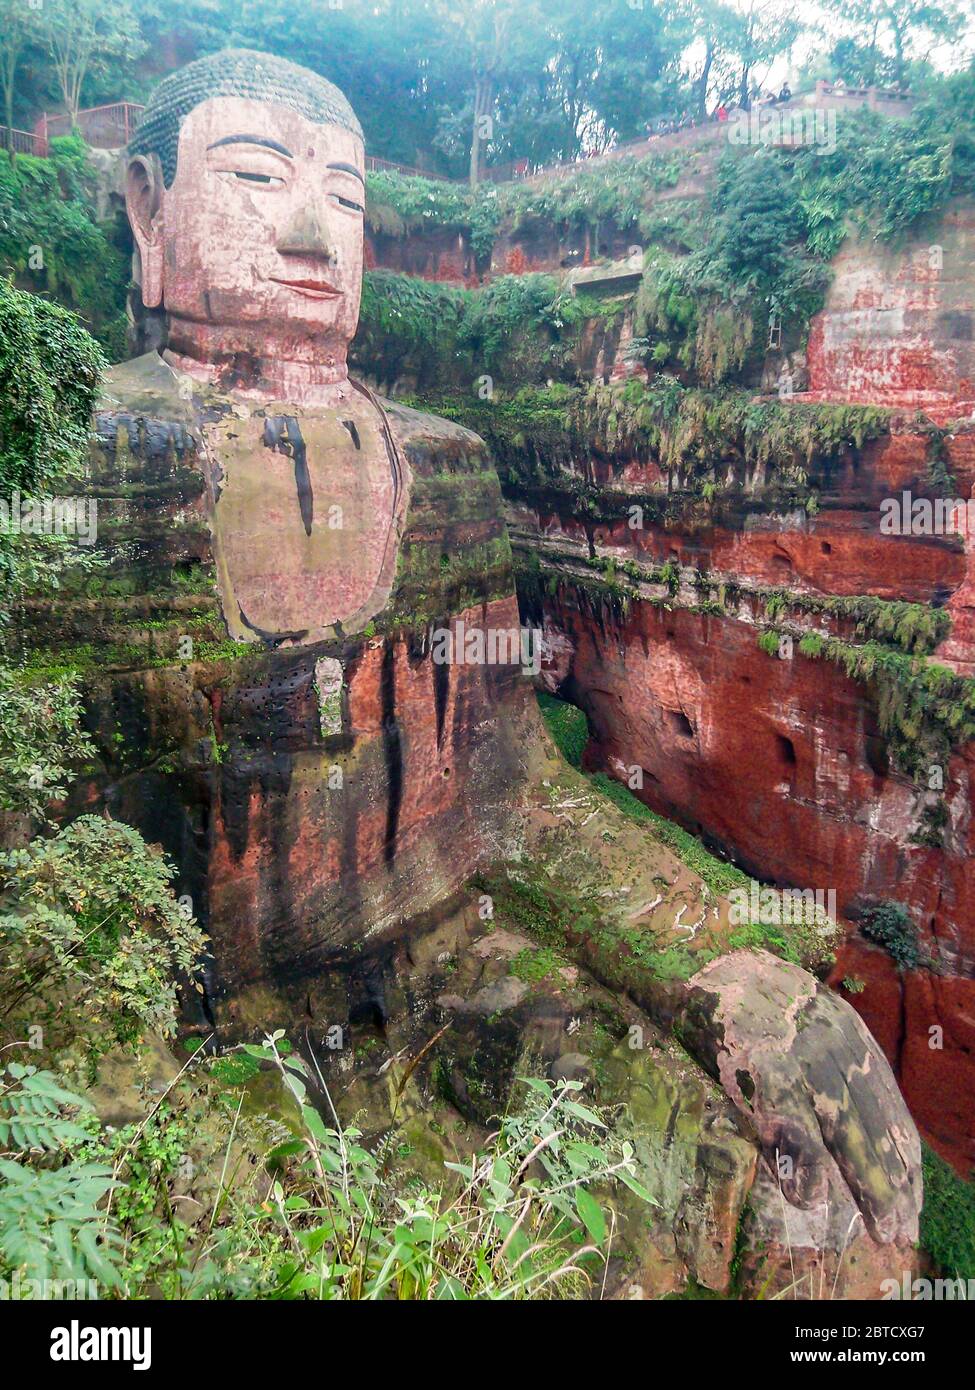 The Leshan Giant Buddha is a 71-metre tall stone statue carved out of a cliff face of cretaceous red bed sandstones in Leshan, Sichuan, China. Stock Photo